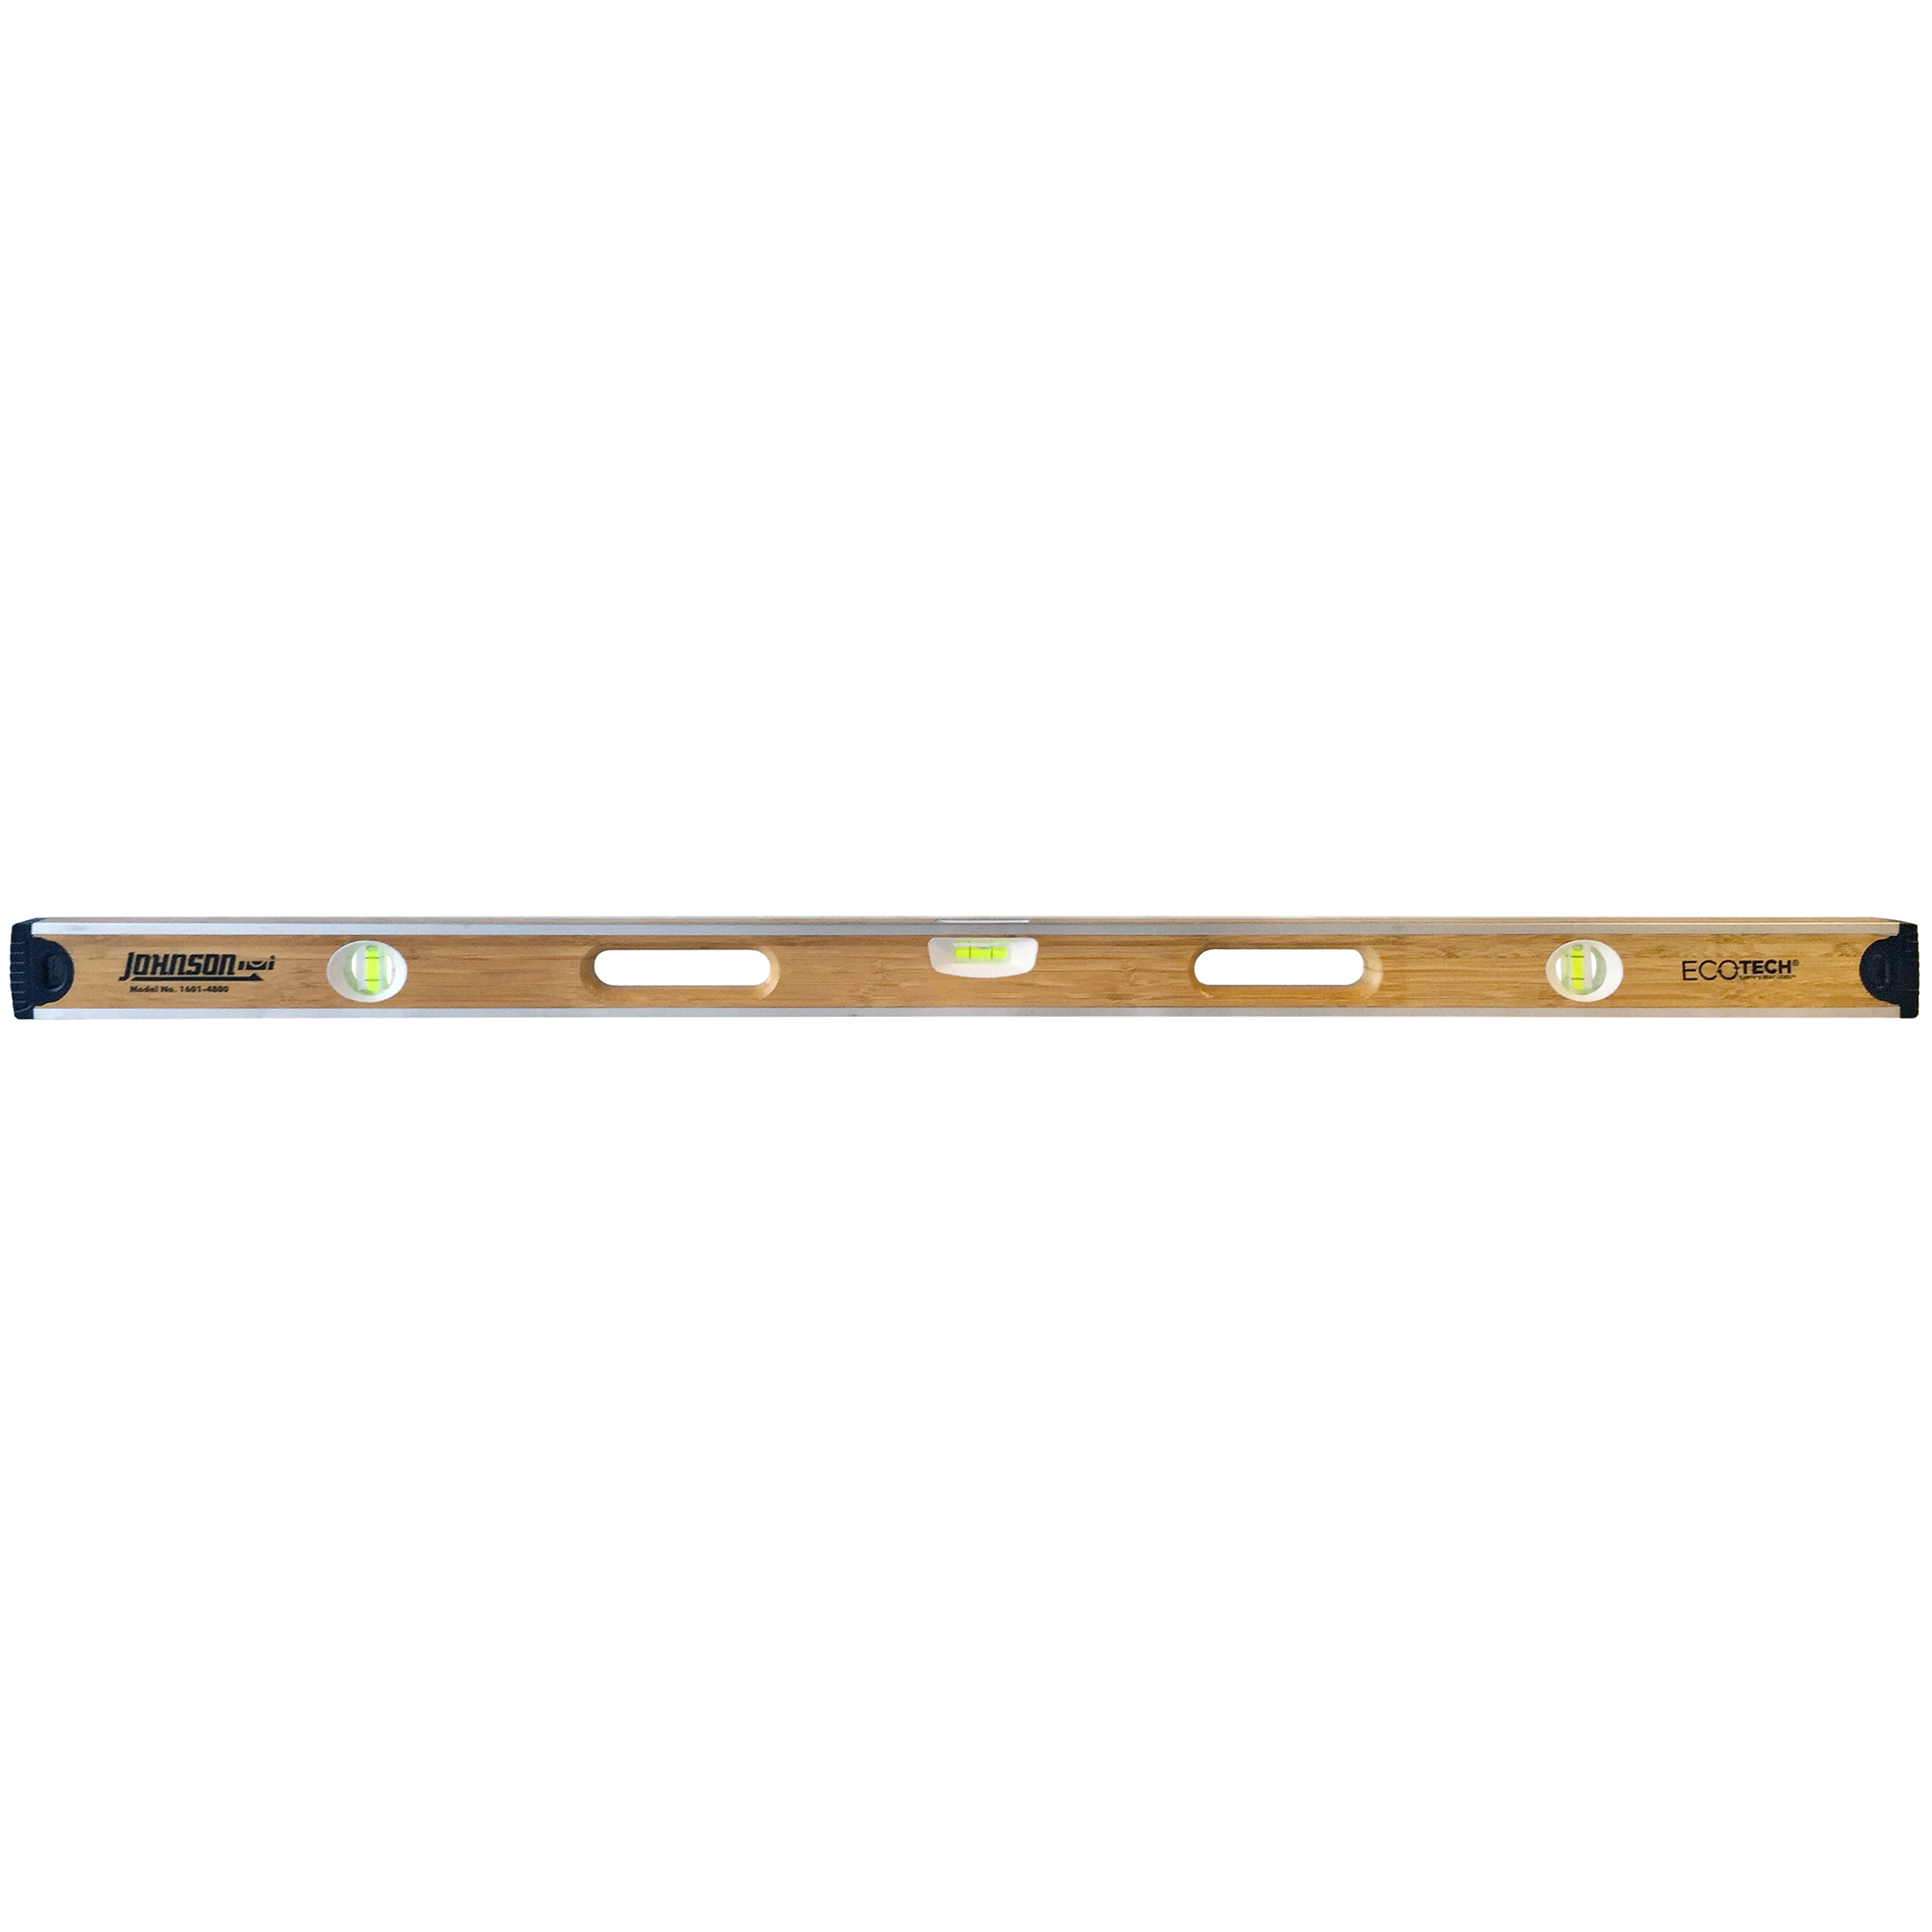 48" Eco-tech Bamboo Level With Block Vials